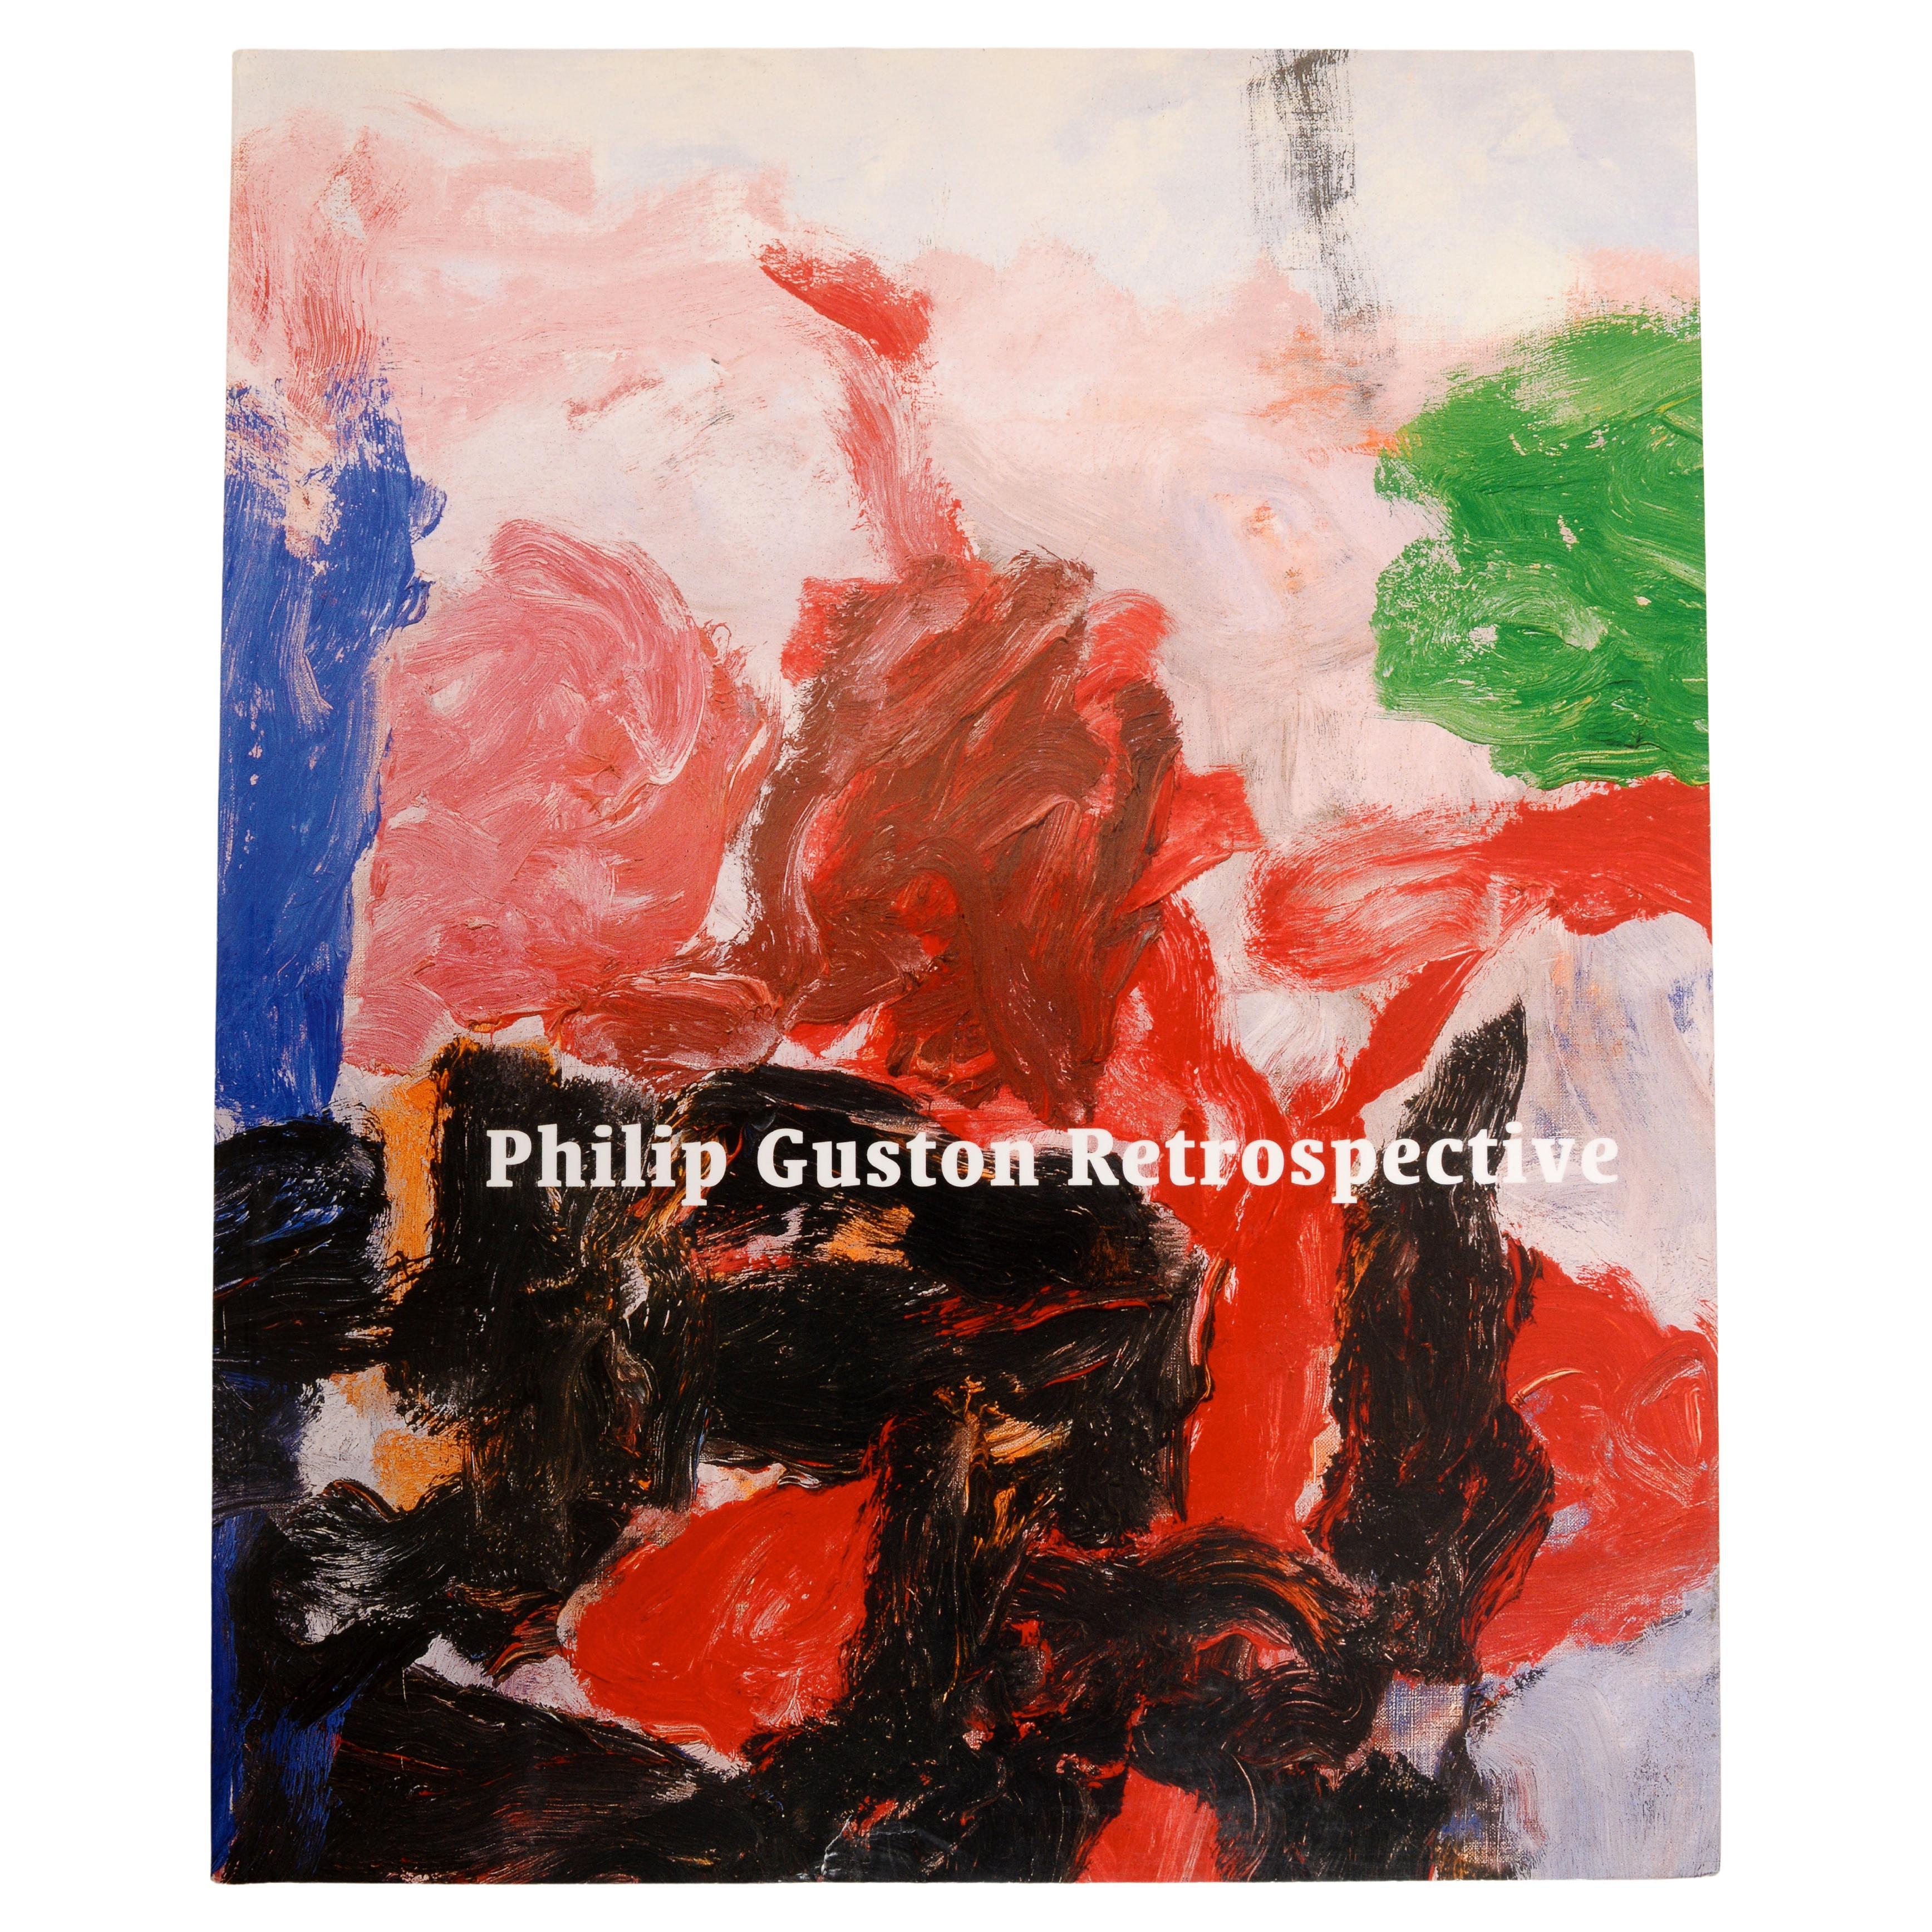 Philip Guston Retrospective by Michael Auping, 1st Ed Exhibition Catalog